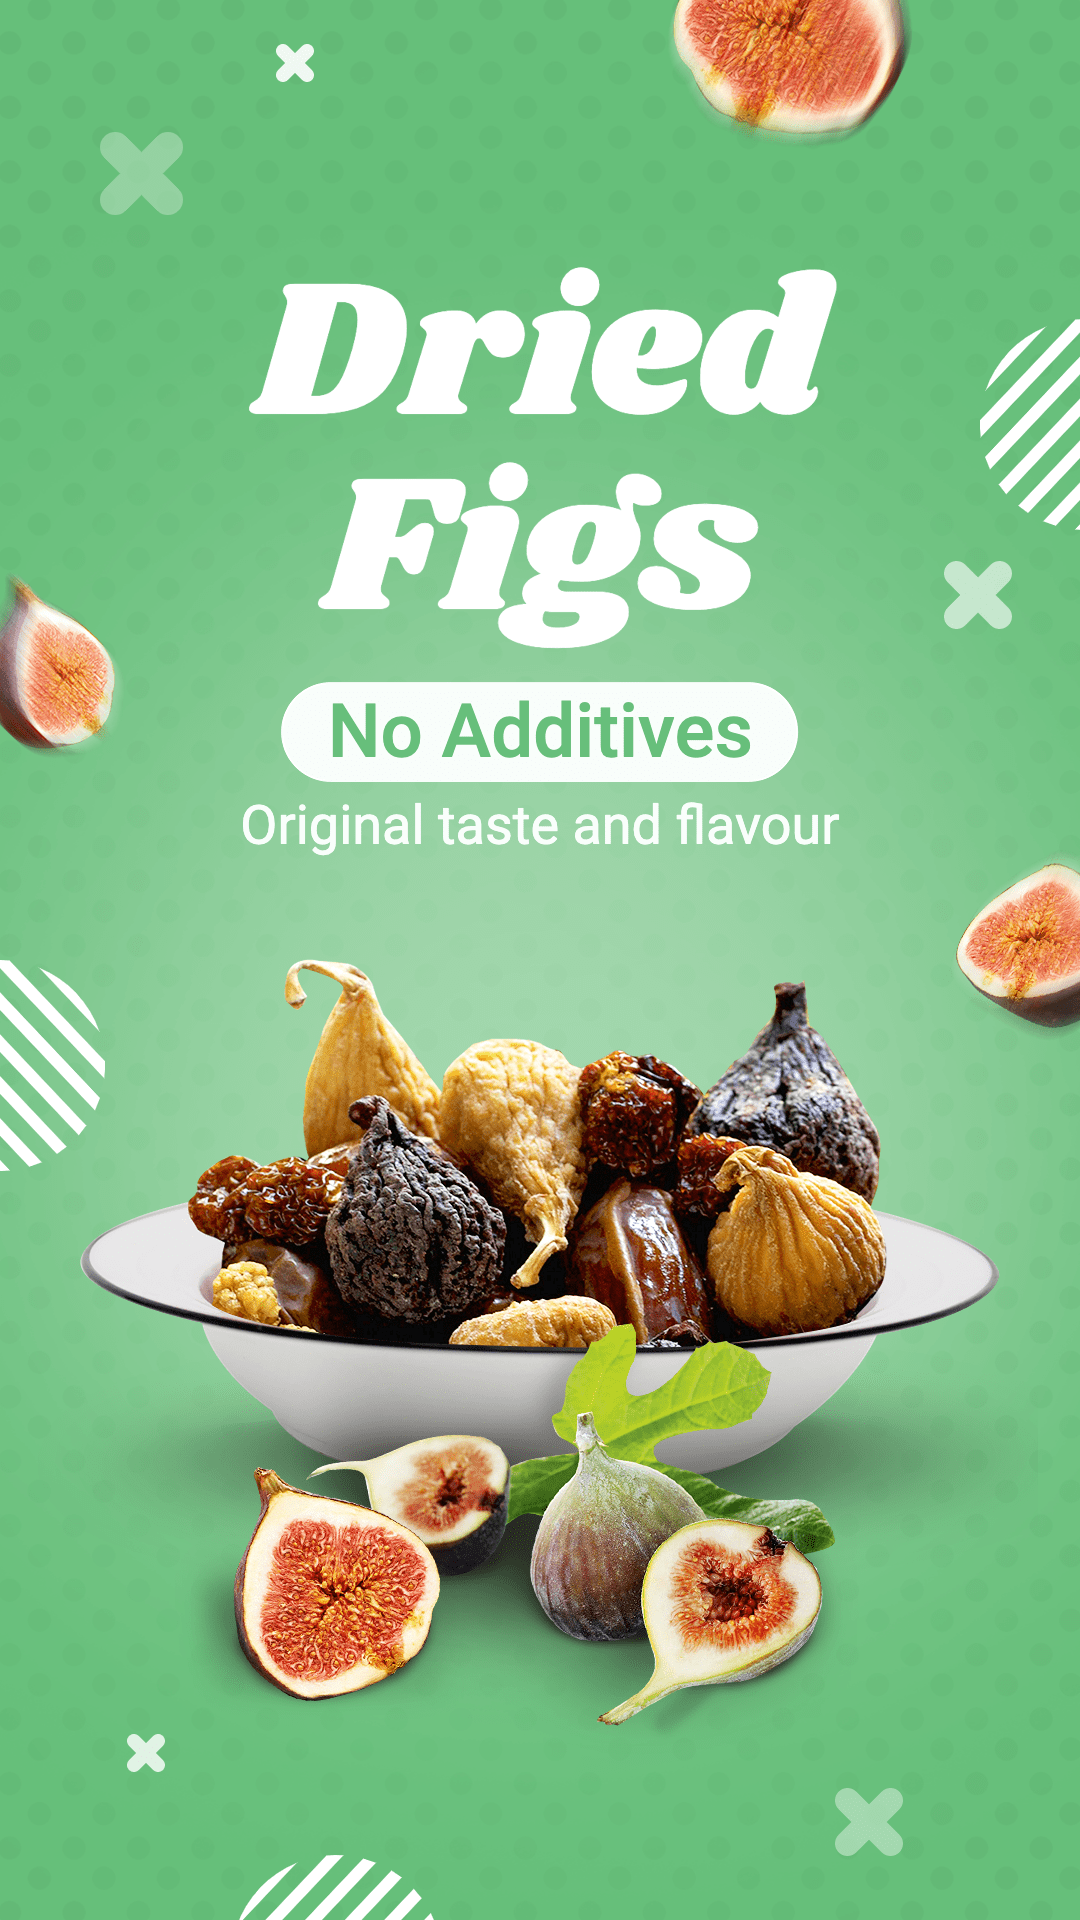 Dried Figs Consumer Packaged Food Snacks Ecommerce Story预览效果